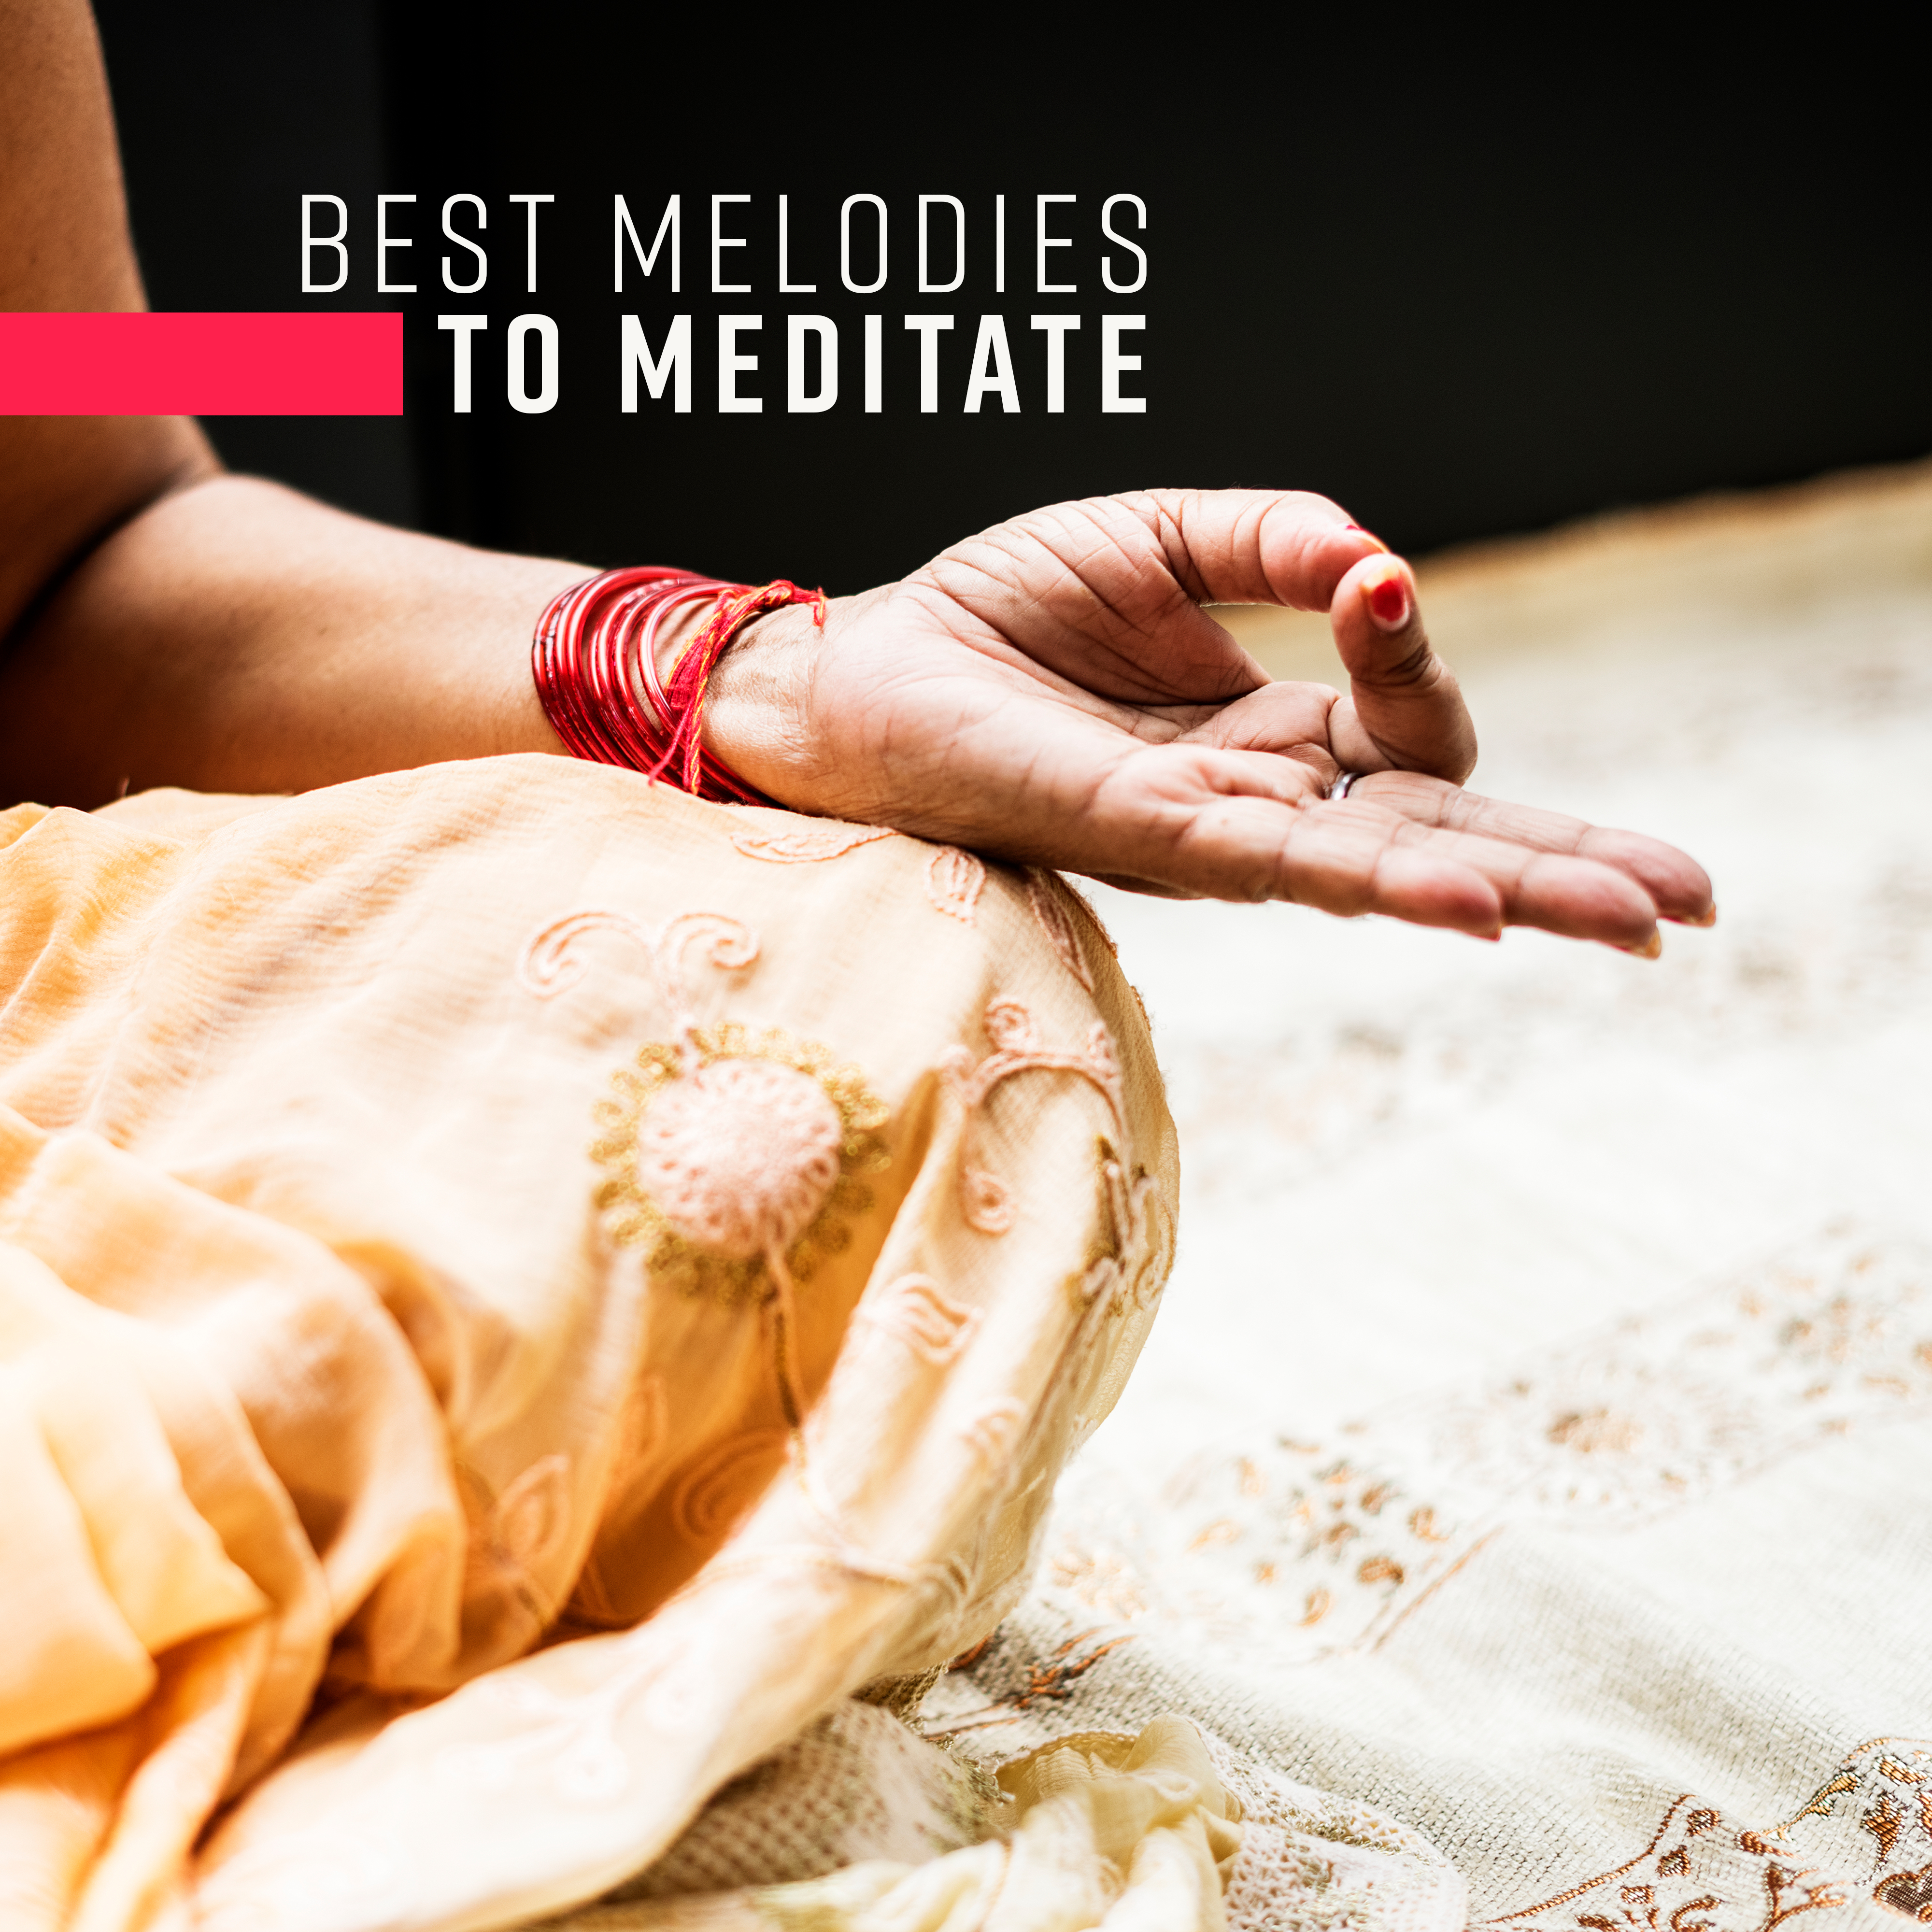 Best Melodies to Meditate